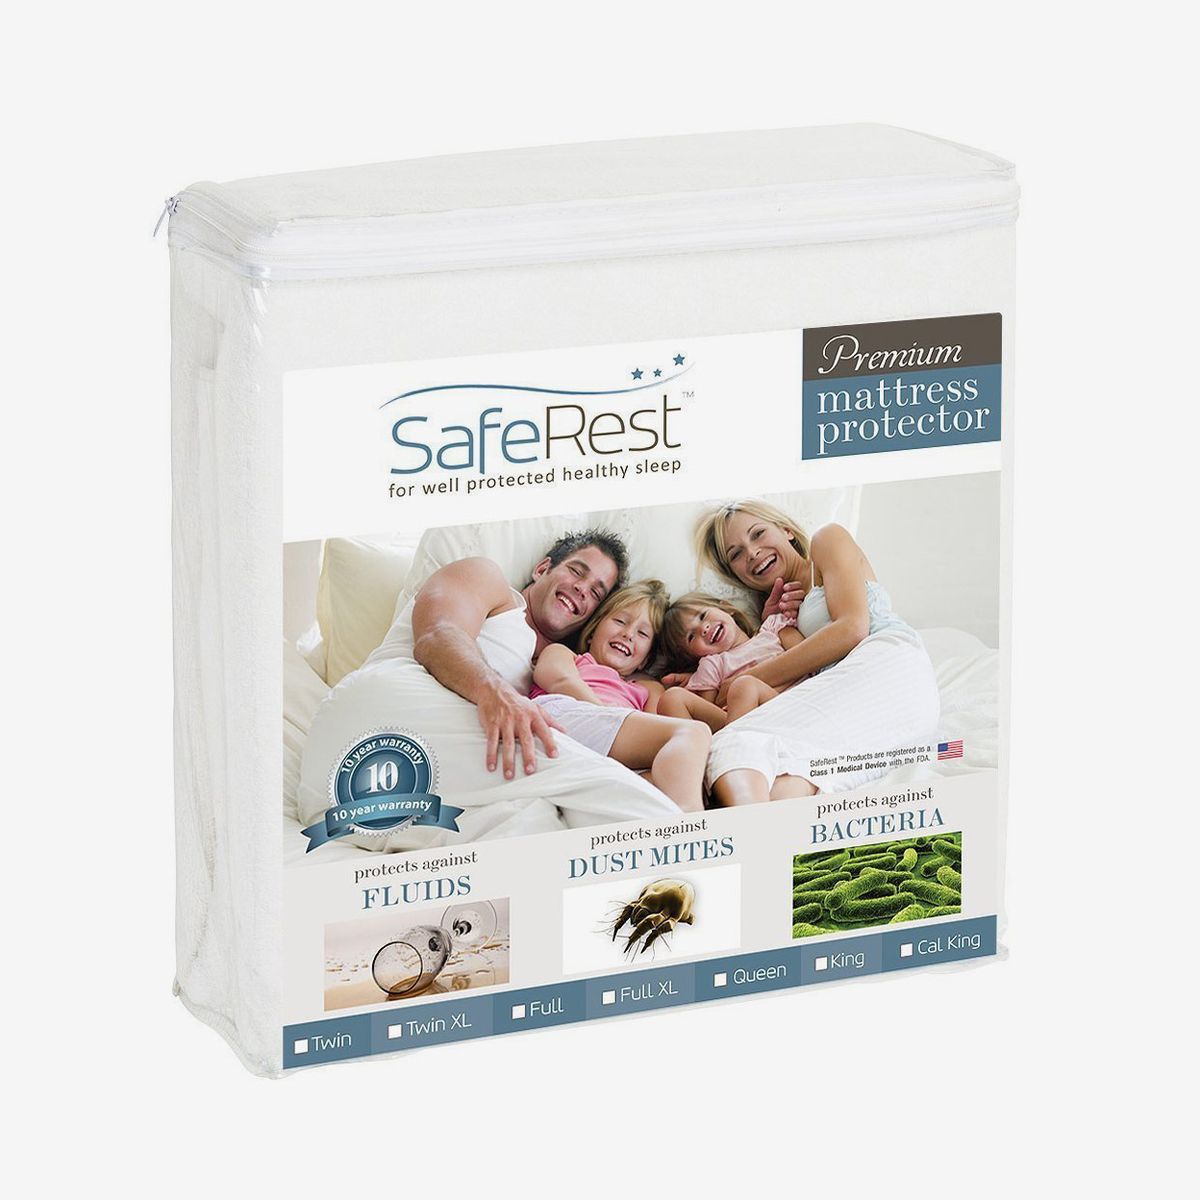 LUCID King Soft Cotton Mattress Protector Cover Hypoallergenic Waterproof 